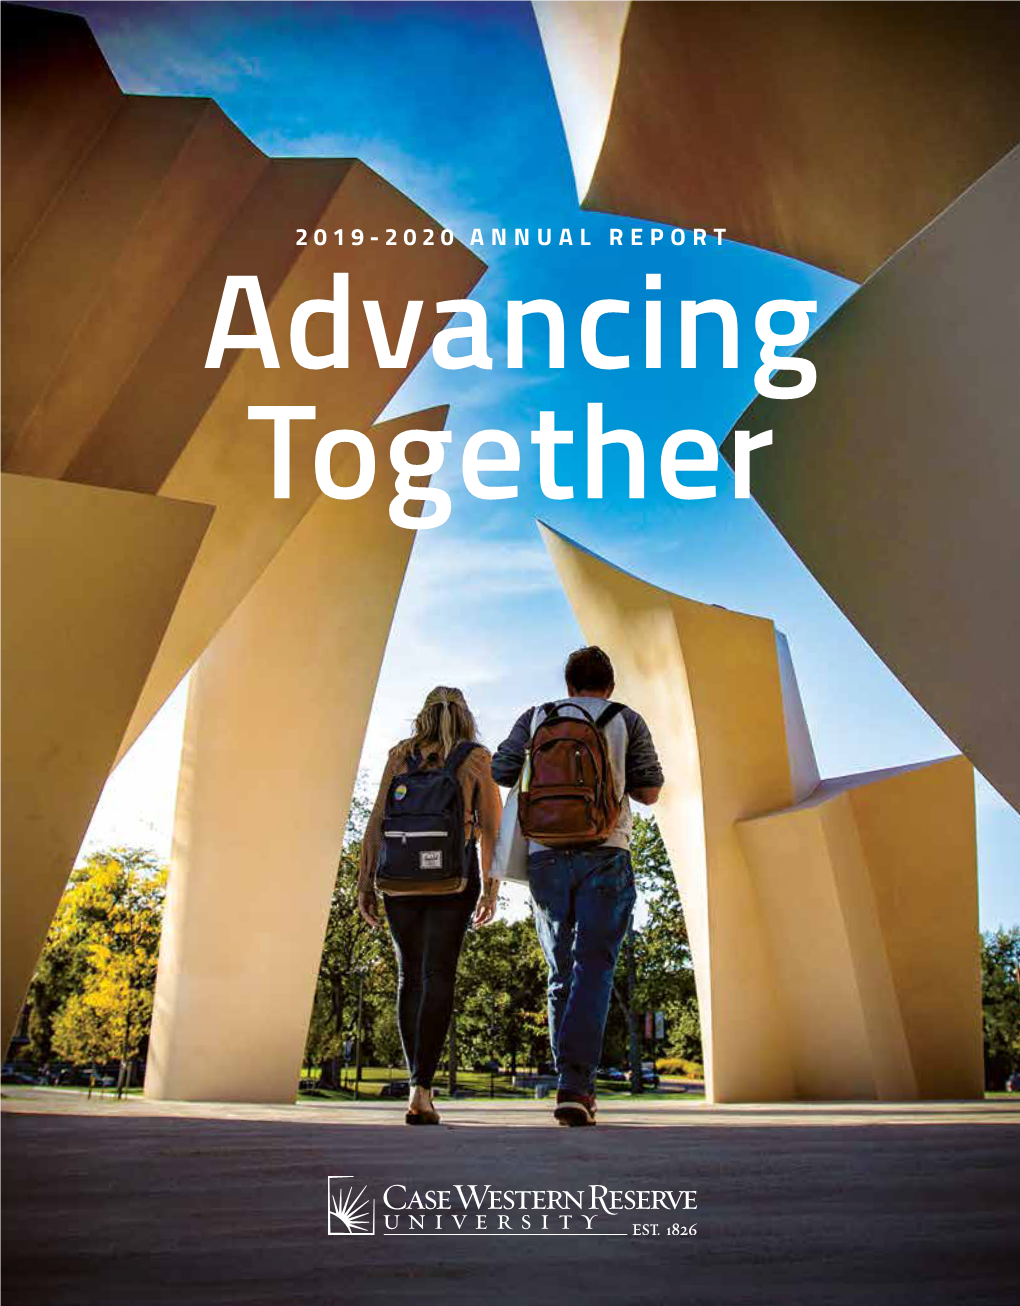 2019-2020 ANNUAL REPORT Advancing Together ADVANCING TOGETHER ANNUAL REPORT 2019-2020 REPORT ANNUAL LETTER from THE